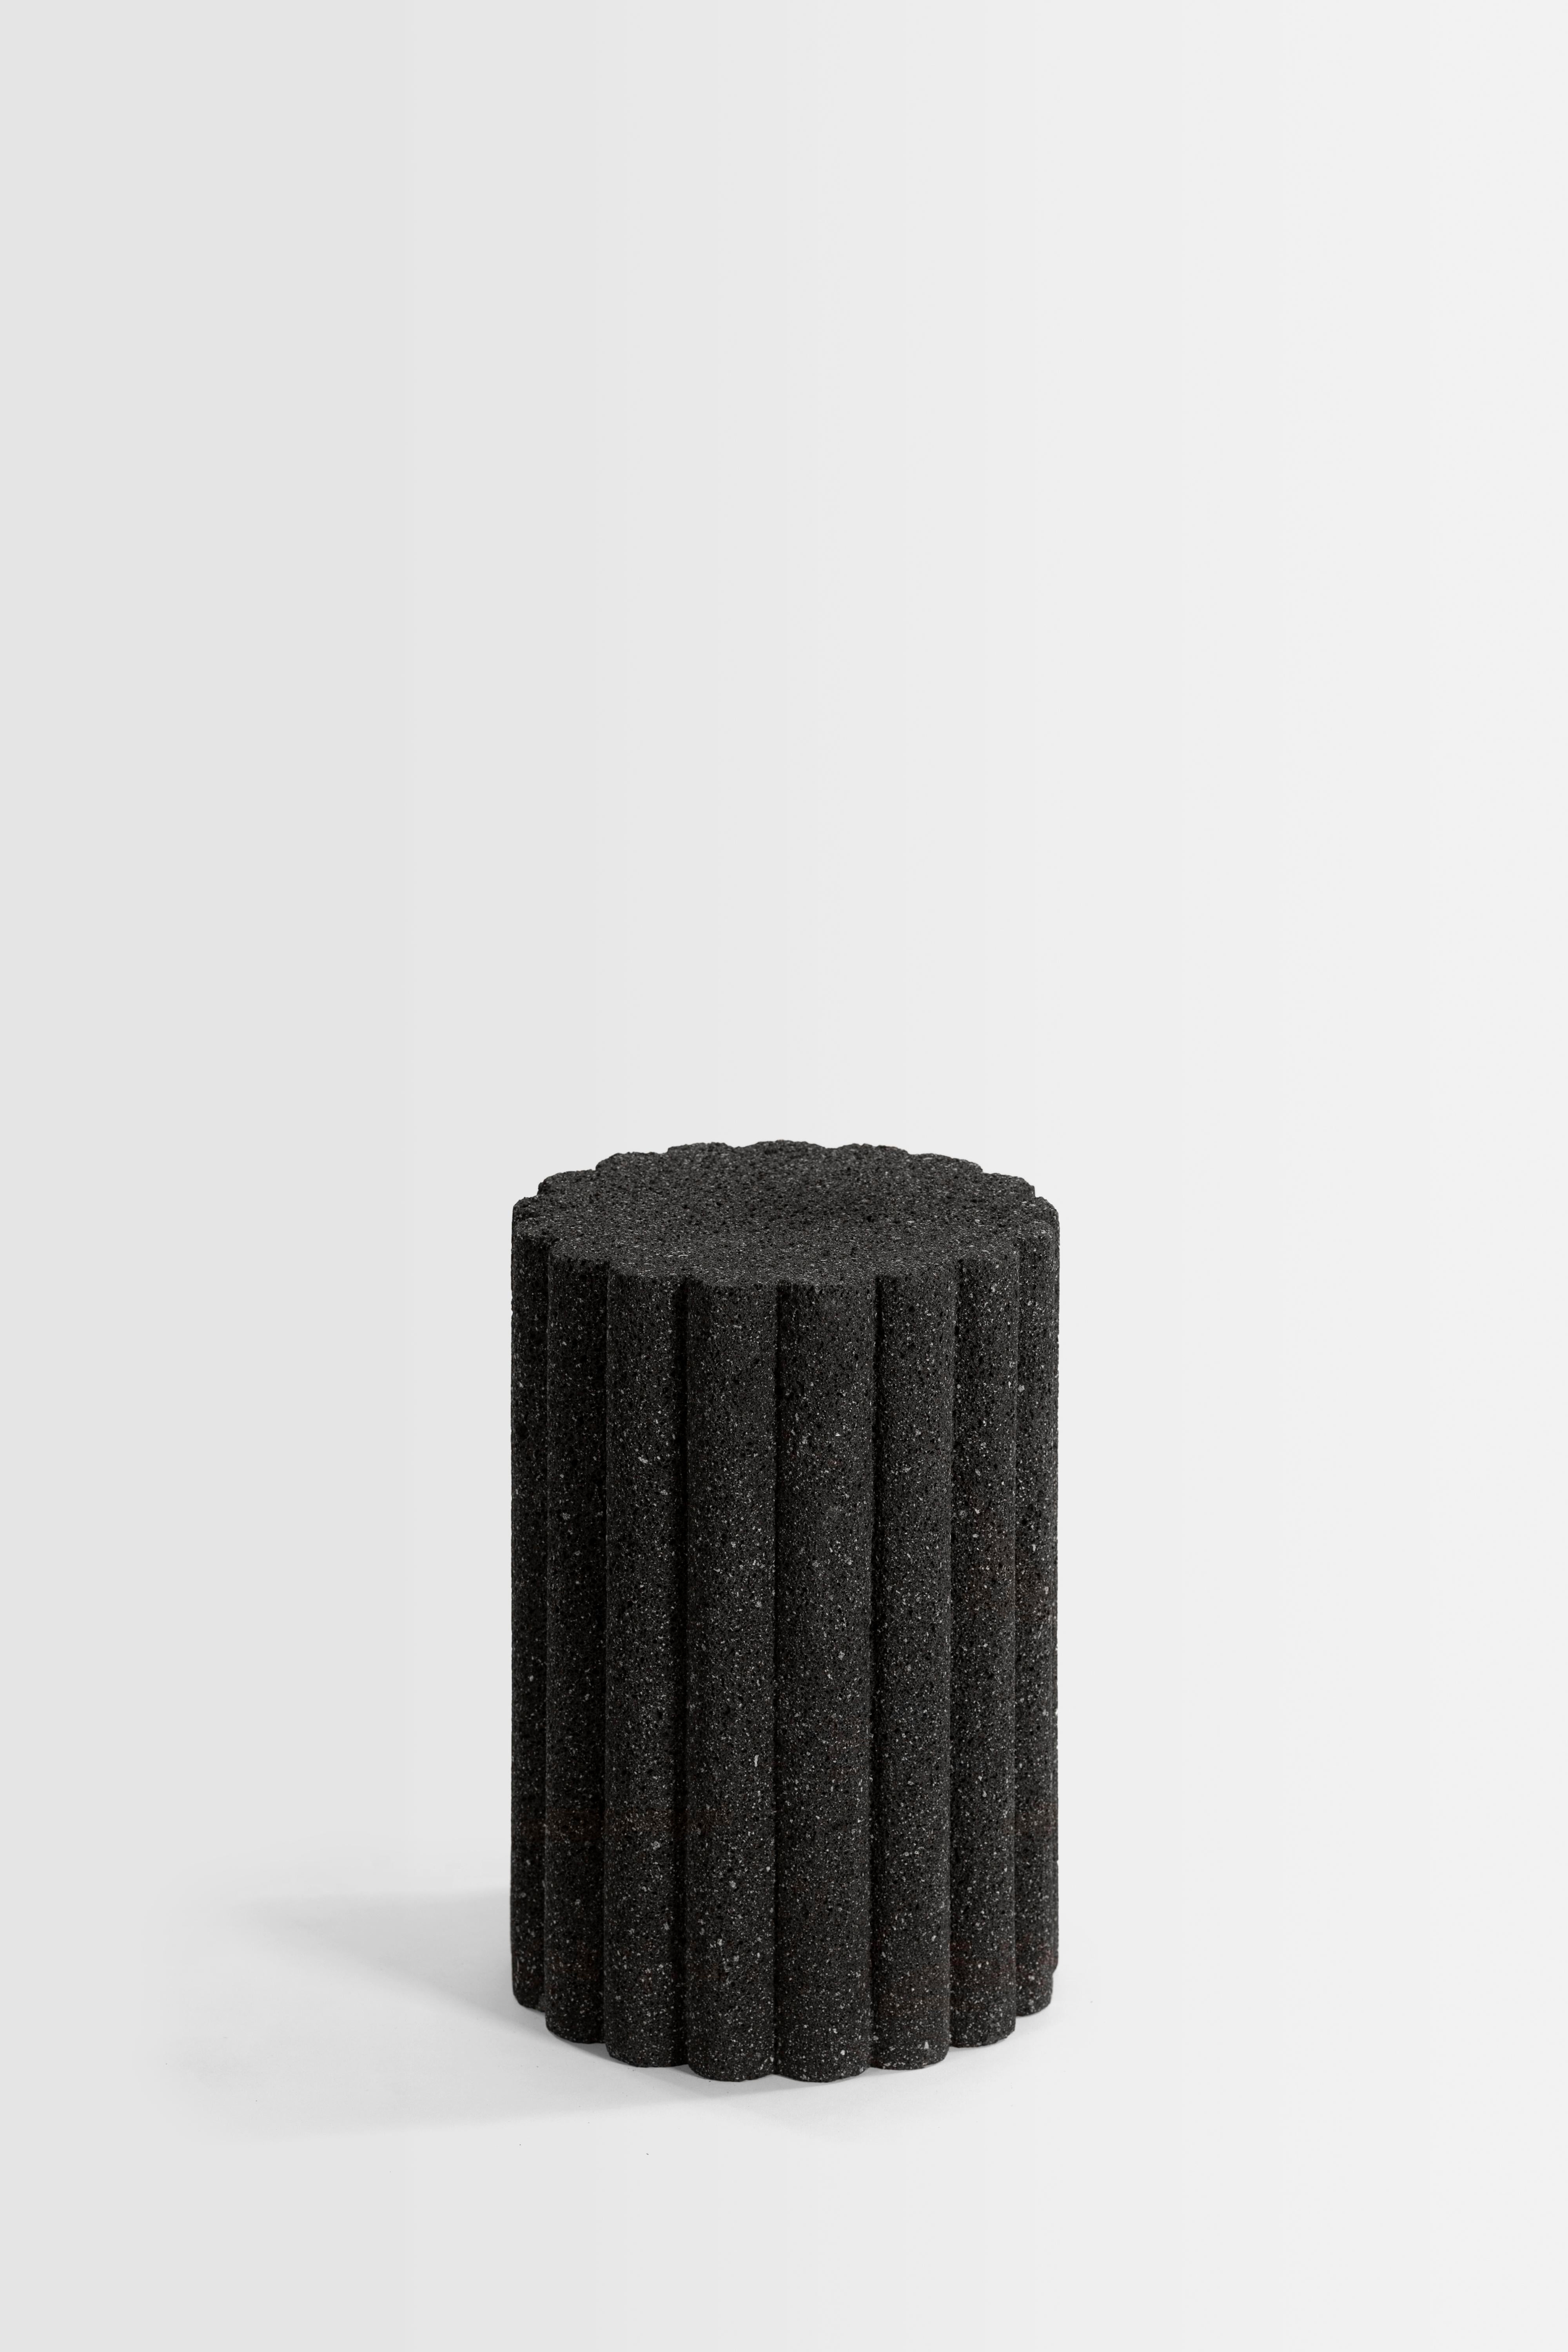 Minimalist Loto Roca Side Tables, Set of 2, Volcanic Stone For Sale